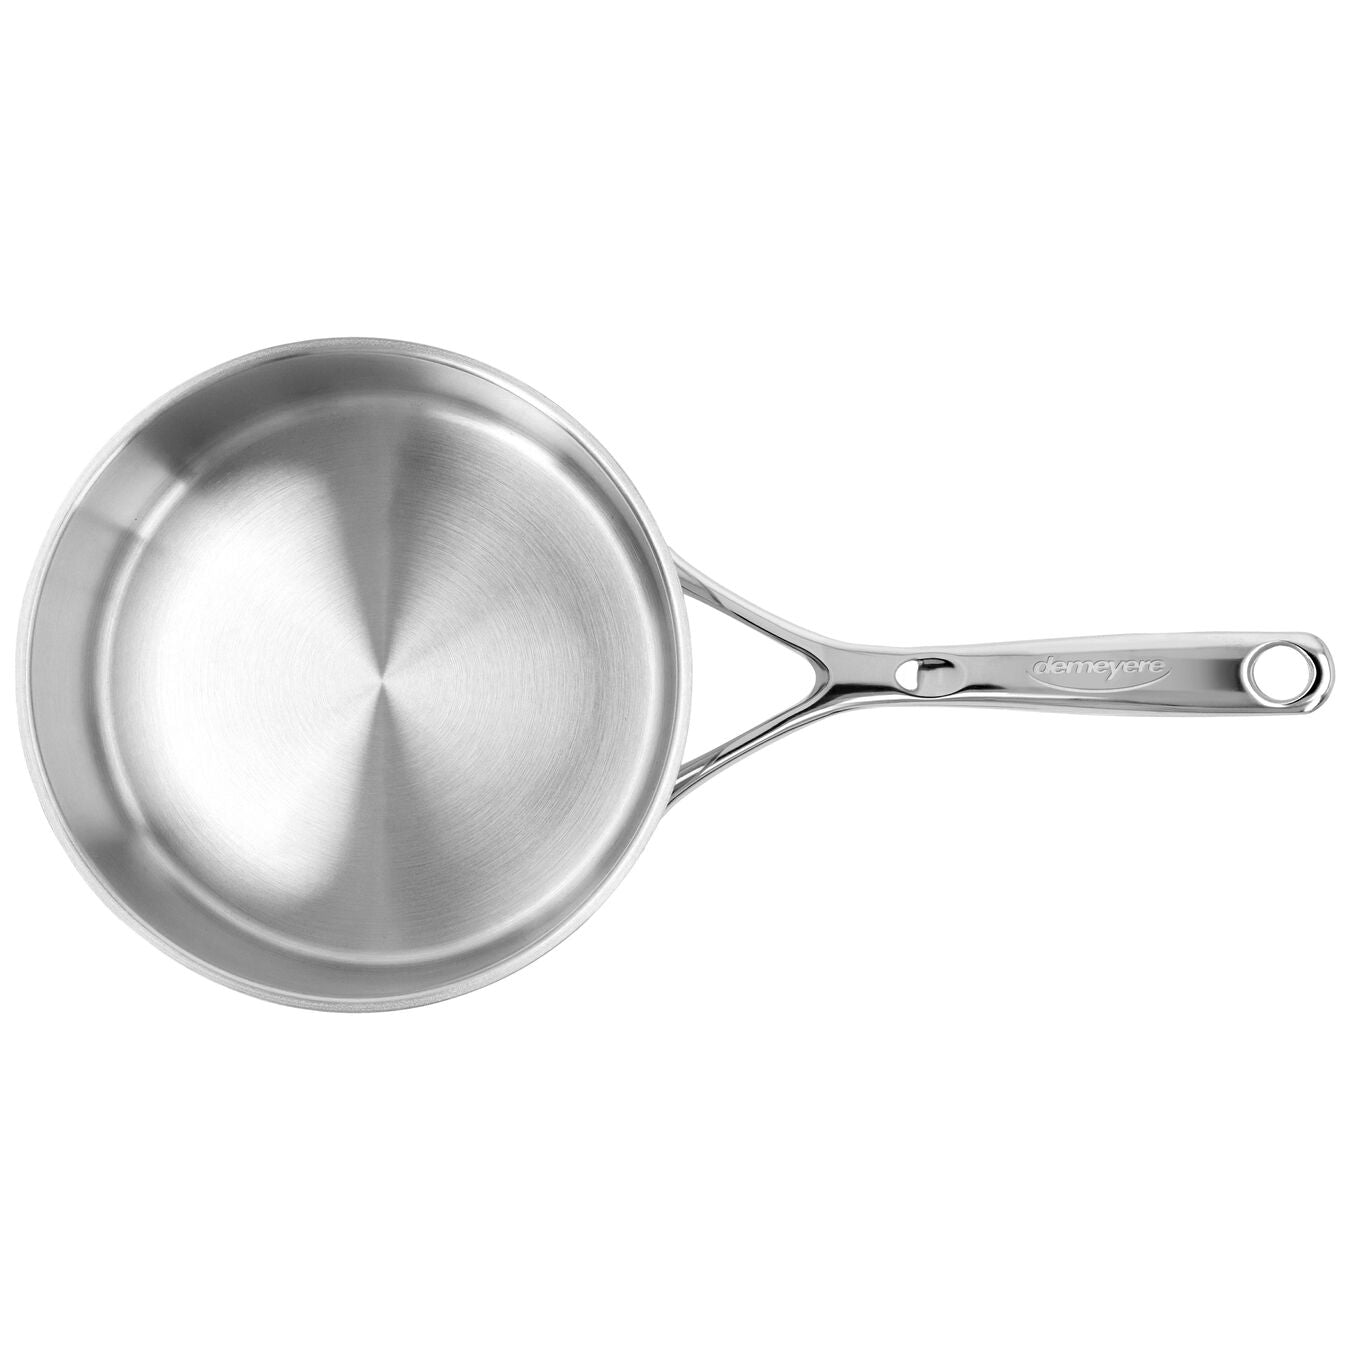 Demeyere Atlantis 7 Collection 3L 18/10 Stainless Steel Round Sauce Pan with Lid Interior 